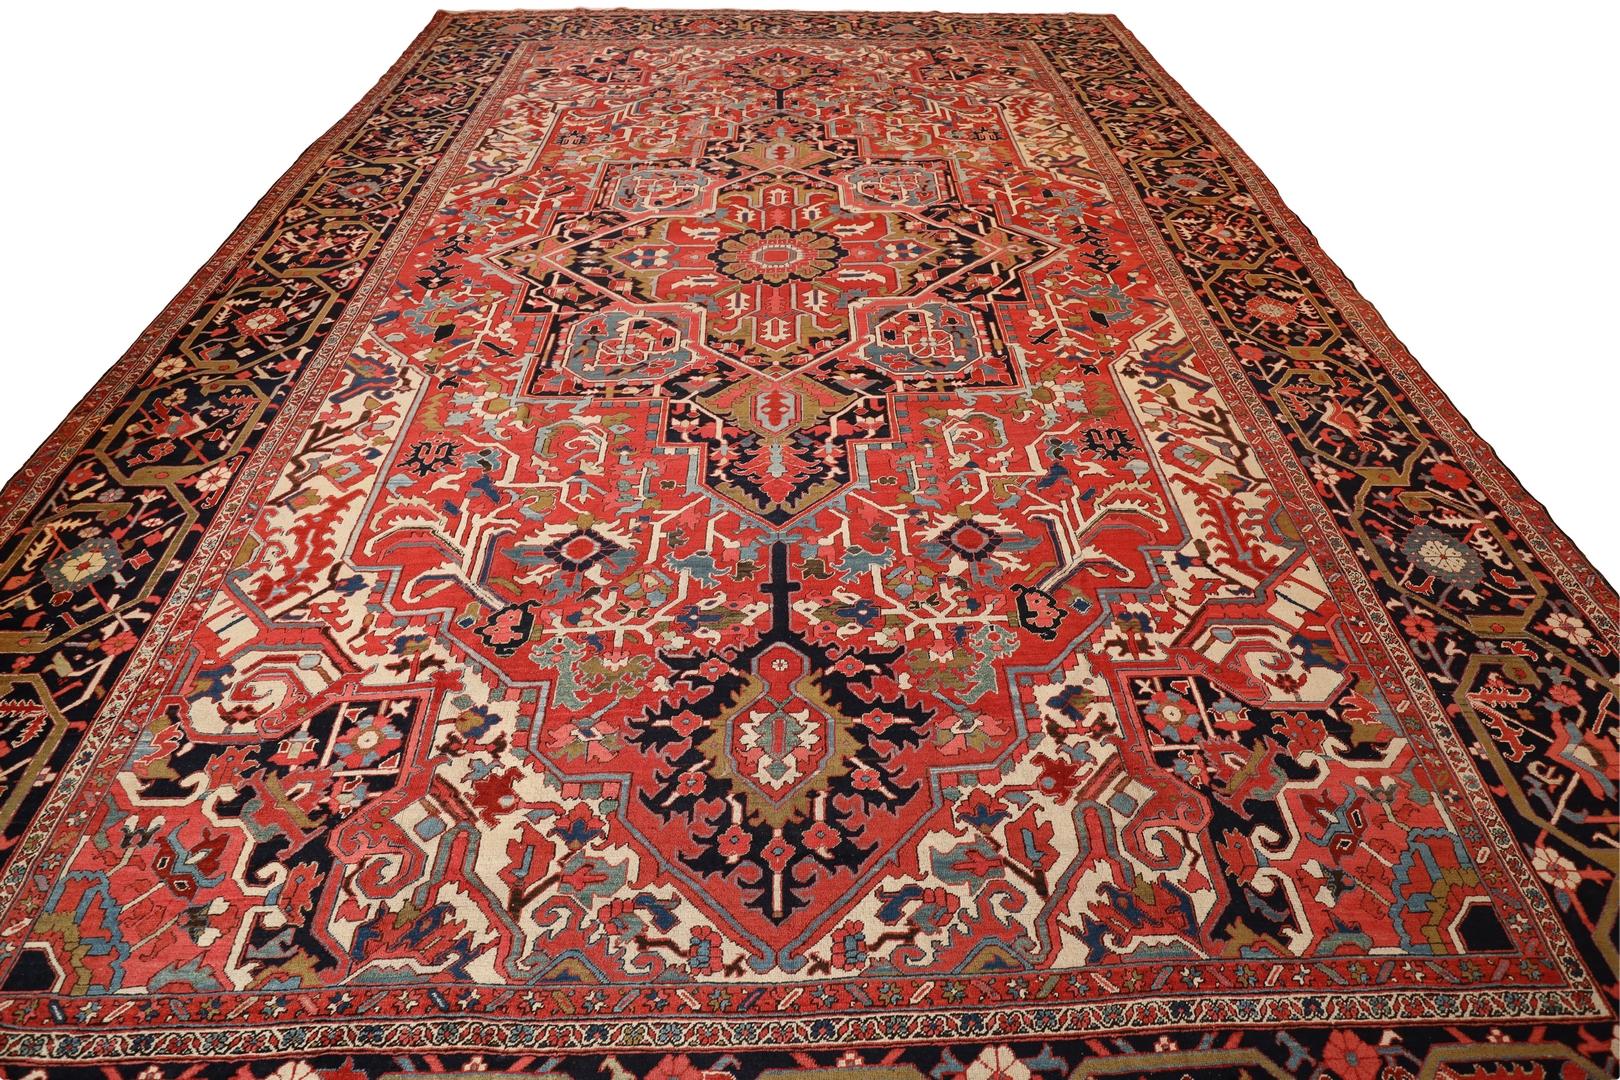 This antique Heriz room size rug is truly a masterpiece of design, craftsmanship, and beauty. The rich and deep red background instantly captures the eye and creates a sense of warmth and elegance that permeates the entire room.

At the center of